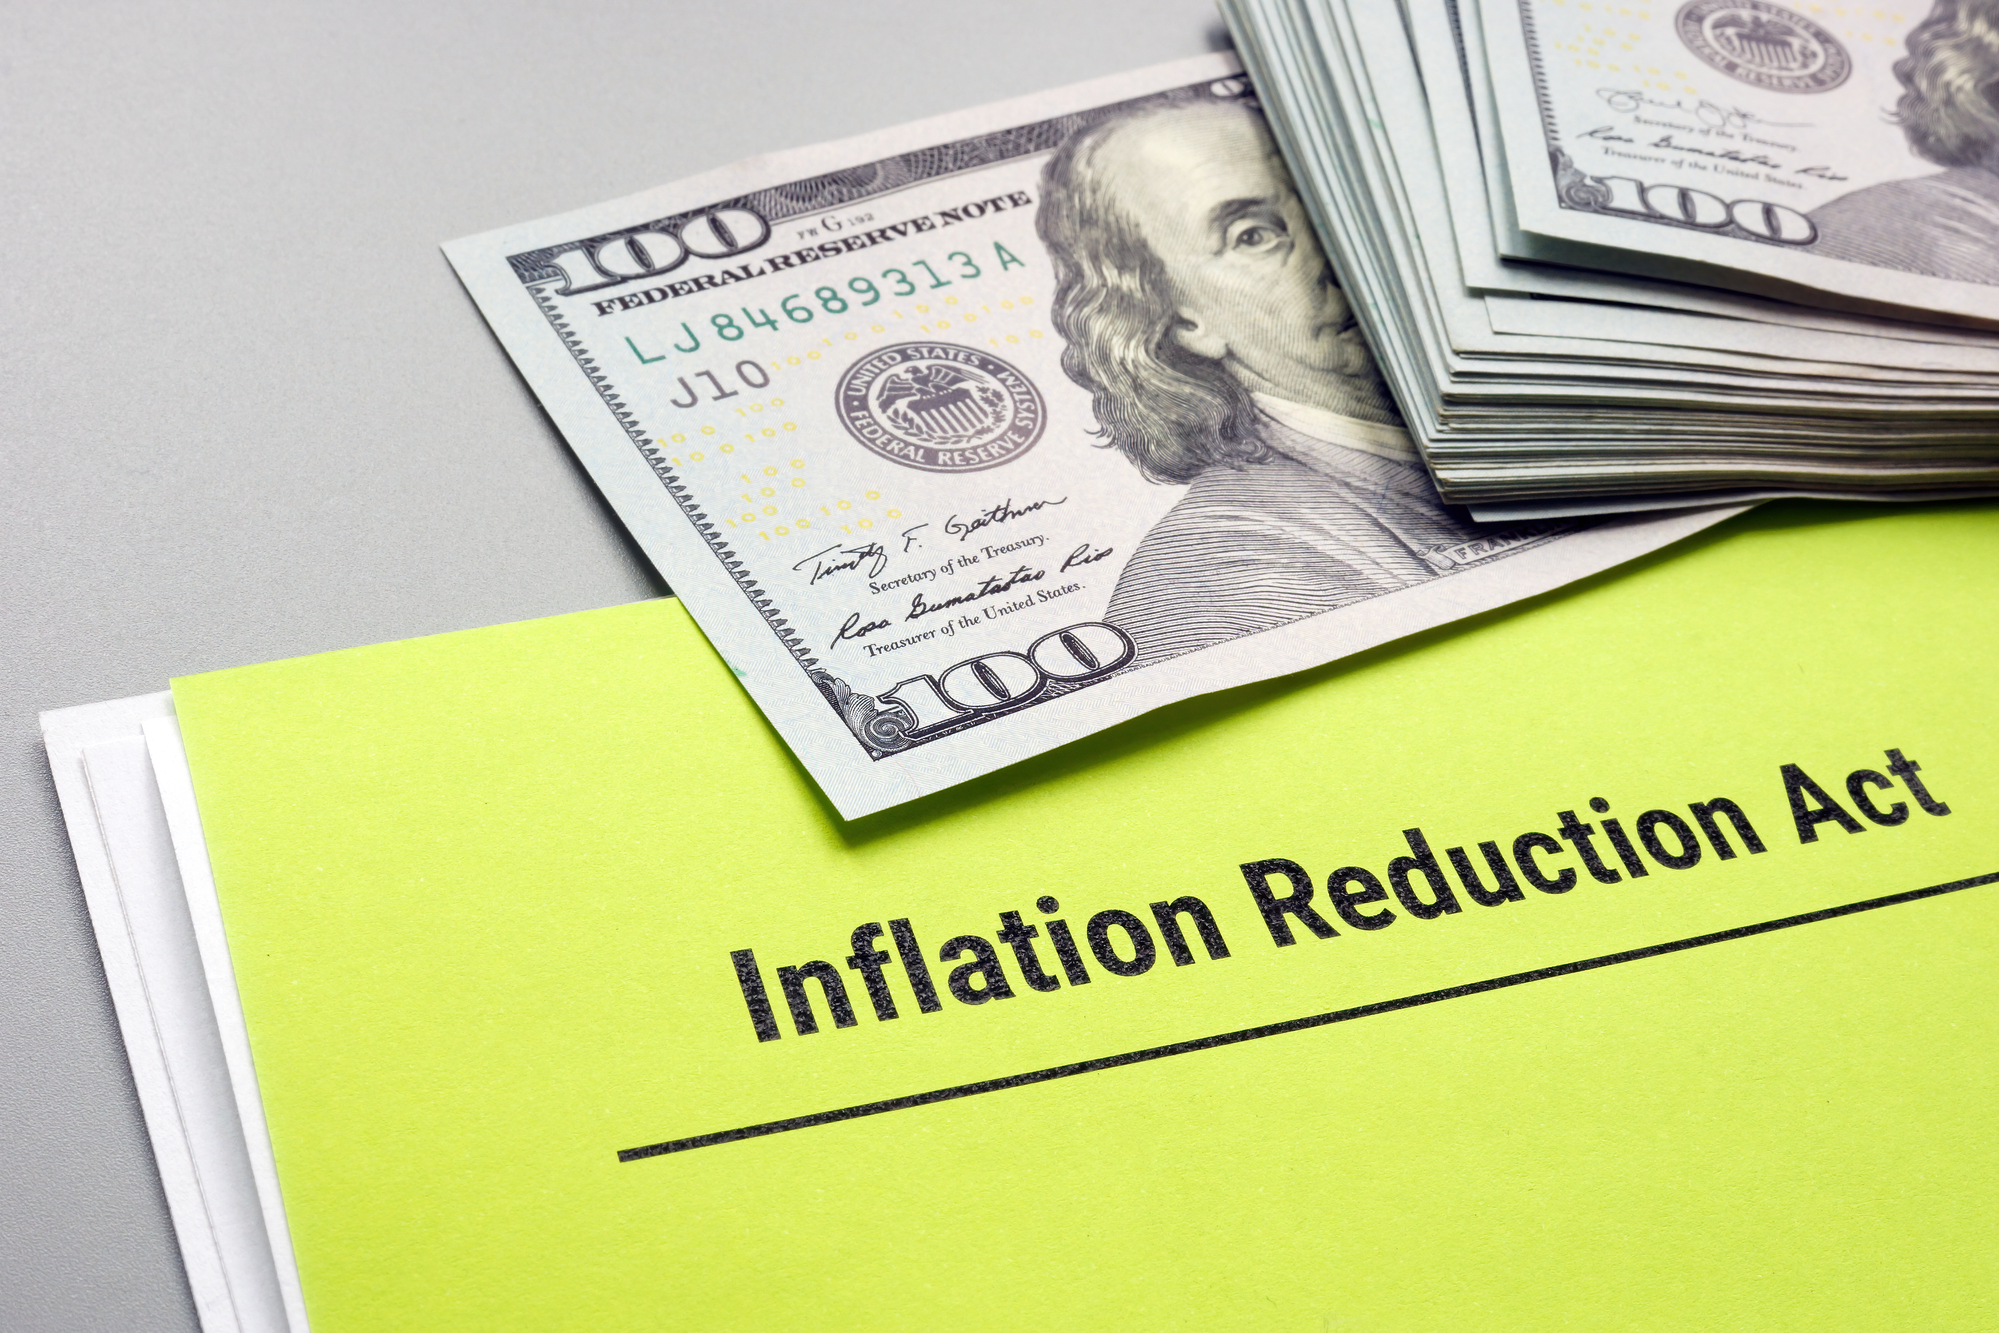 The Inflation Reduction Act